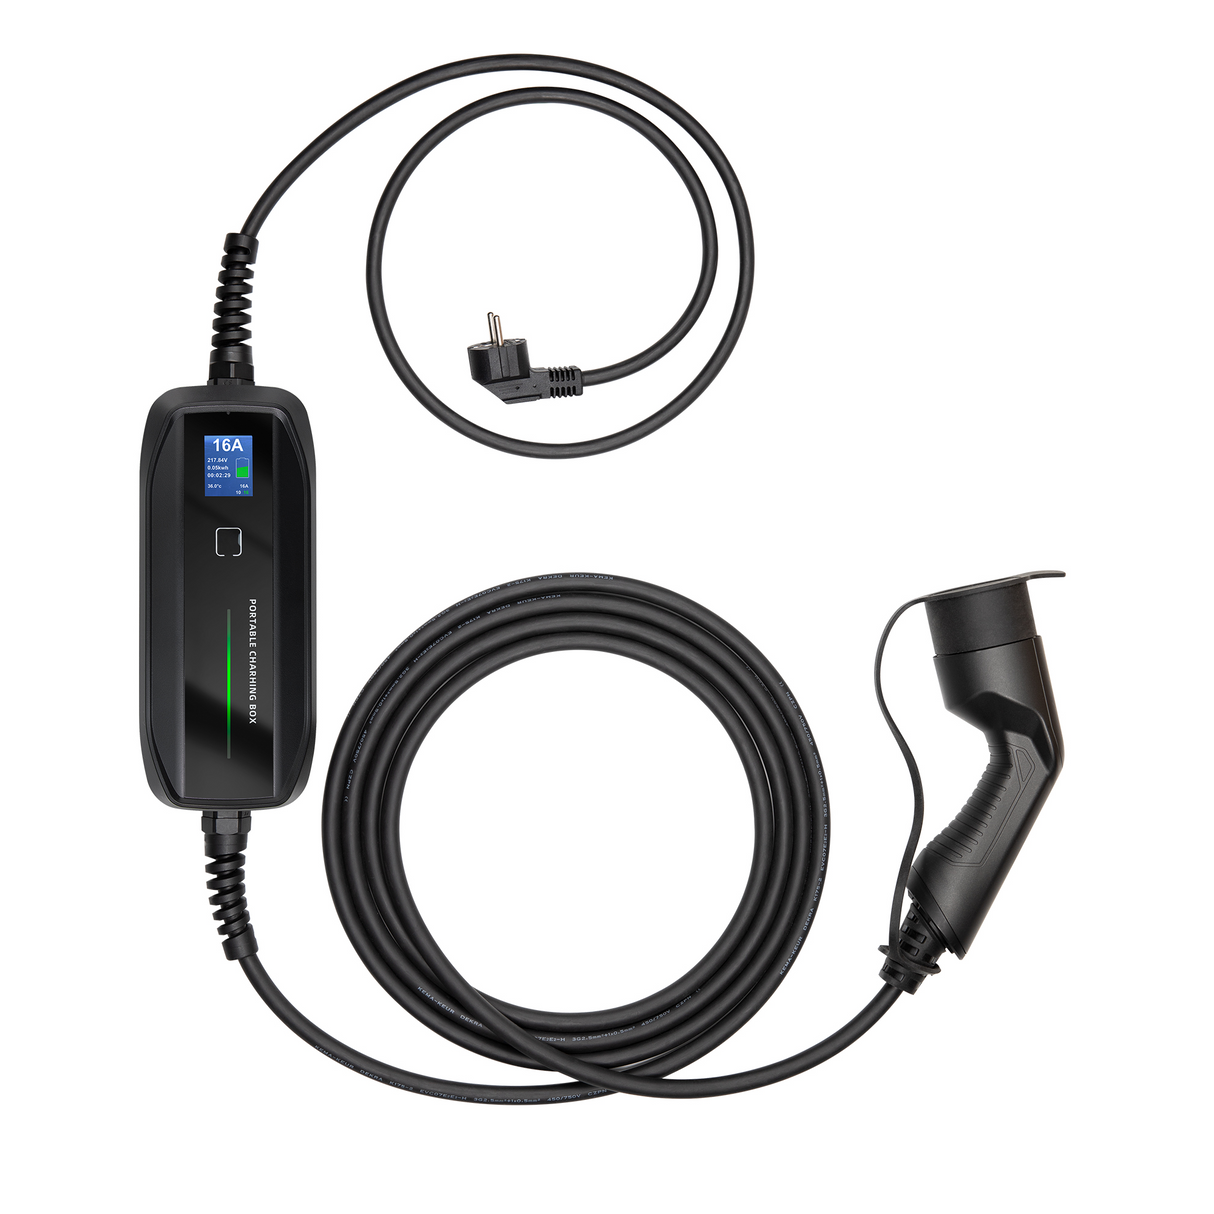 Mobile charger Porsche Macan - Besen with LCD - Type 2 to Schuko